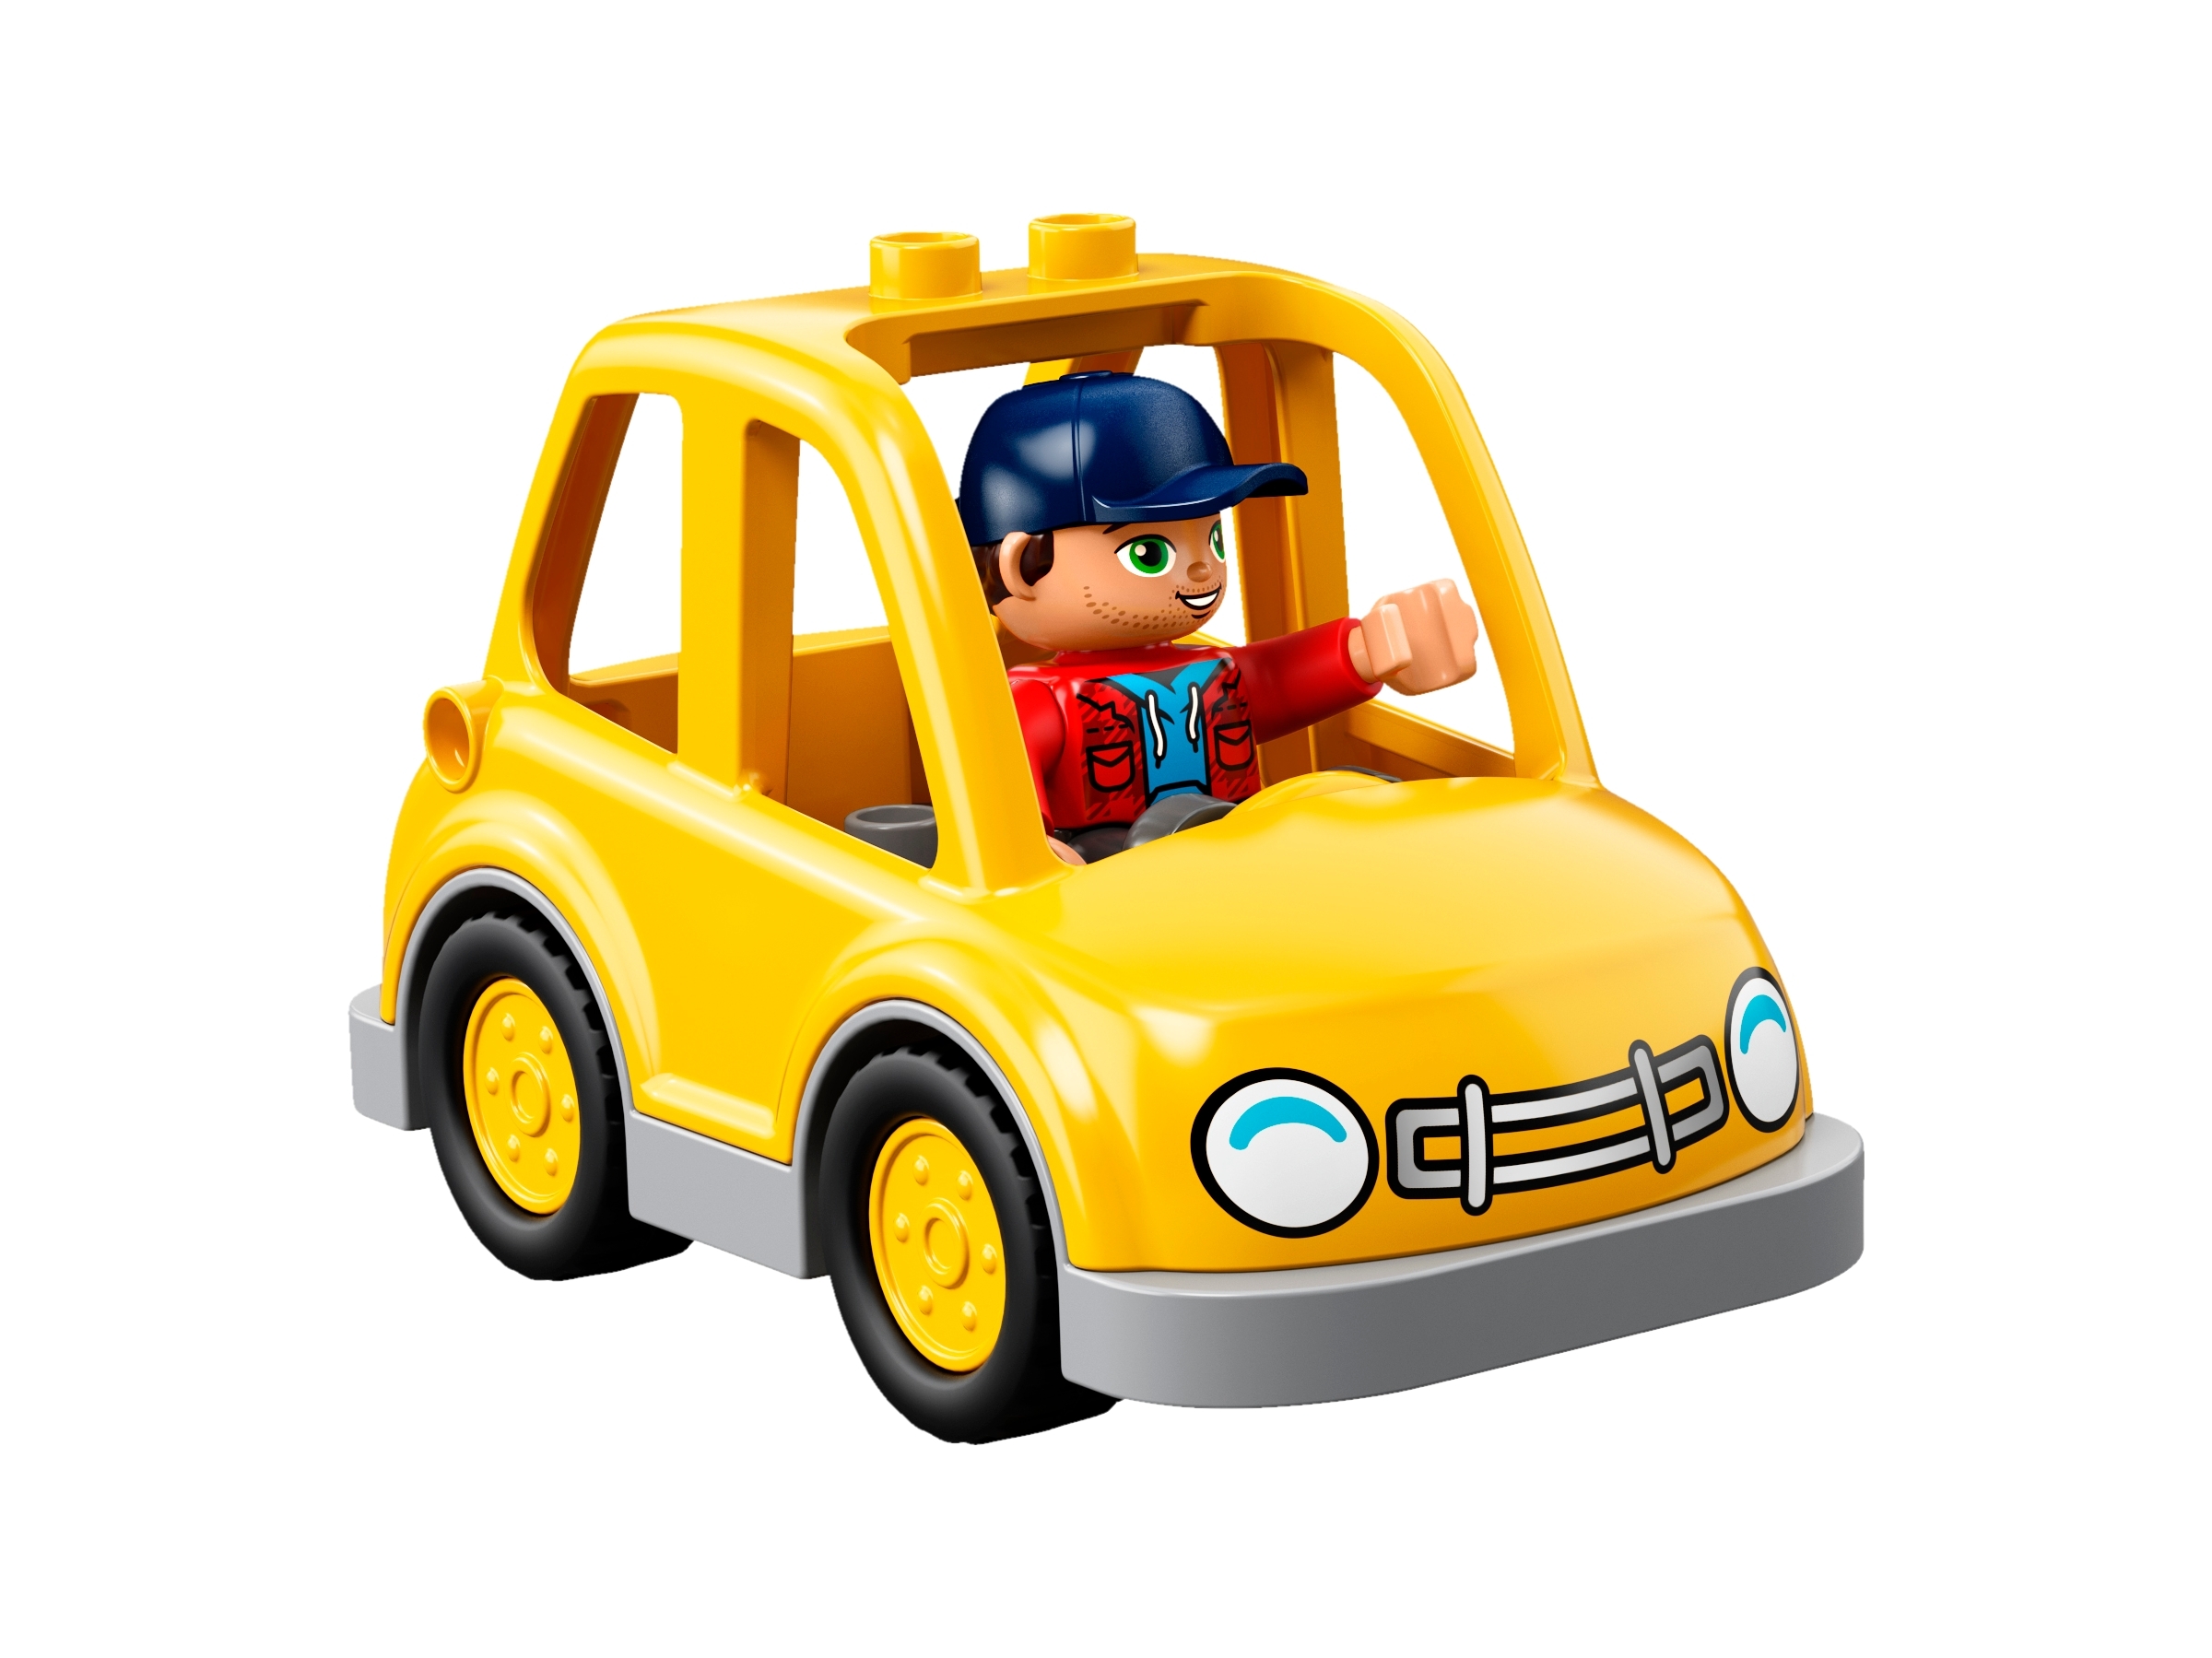 Market 10867 | DUPLO® | Buy online at the Official LEGO®